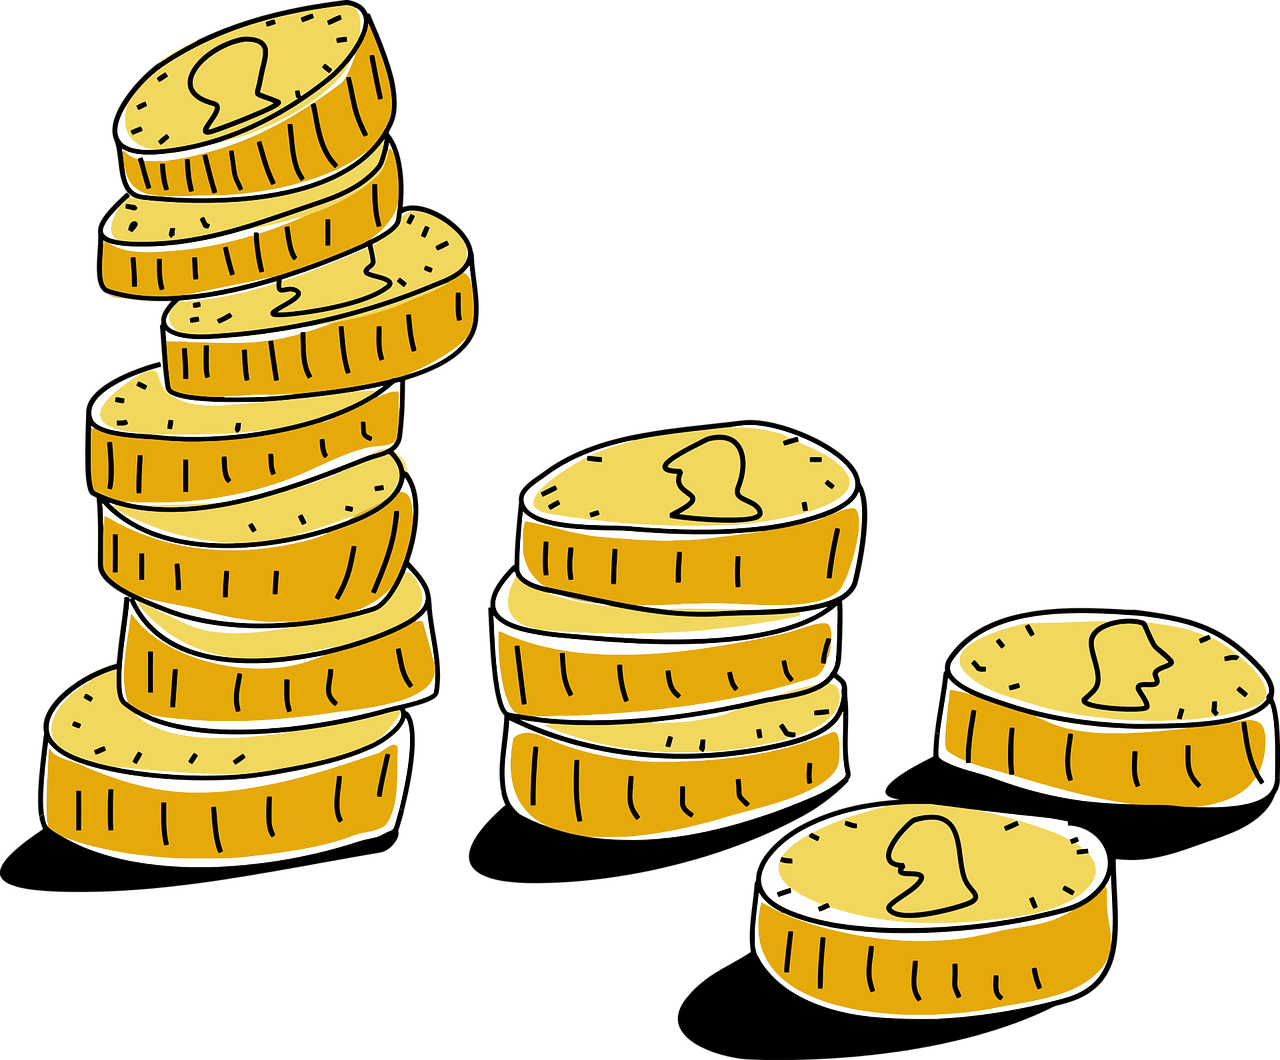 Illustration of a tower of coins